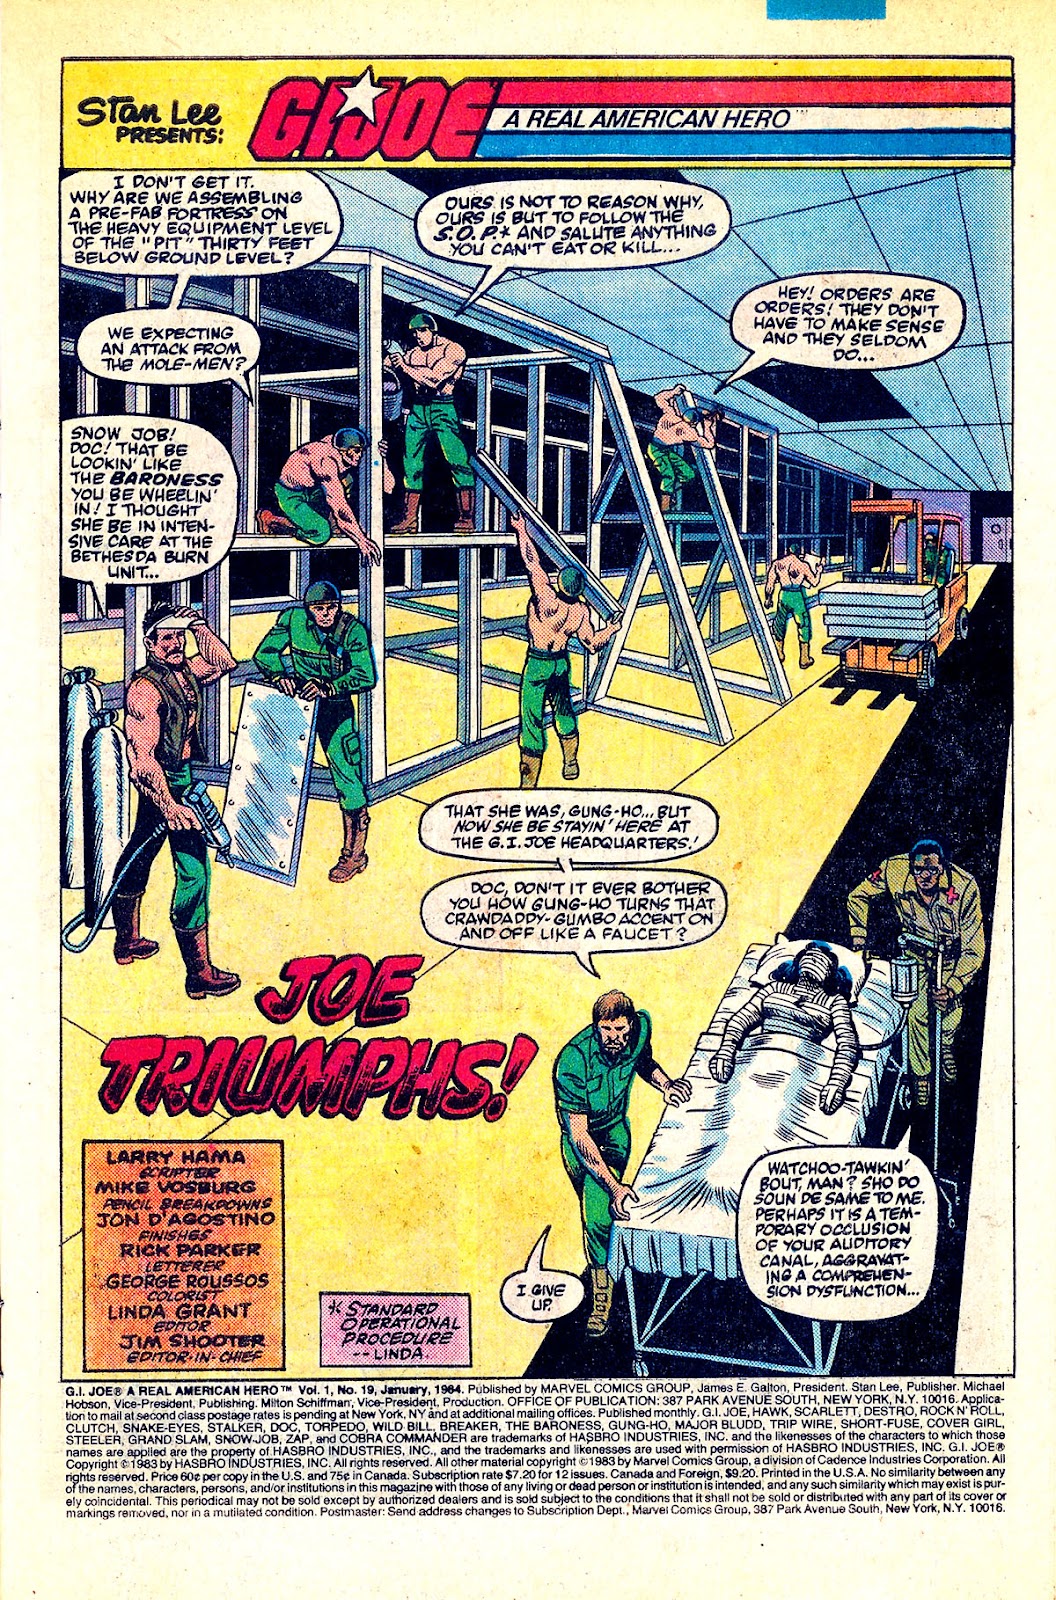 G.I. Joe: A Real American Hero issue 19 - Page 2